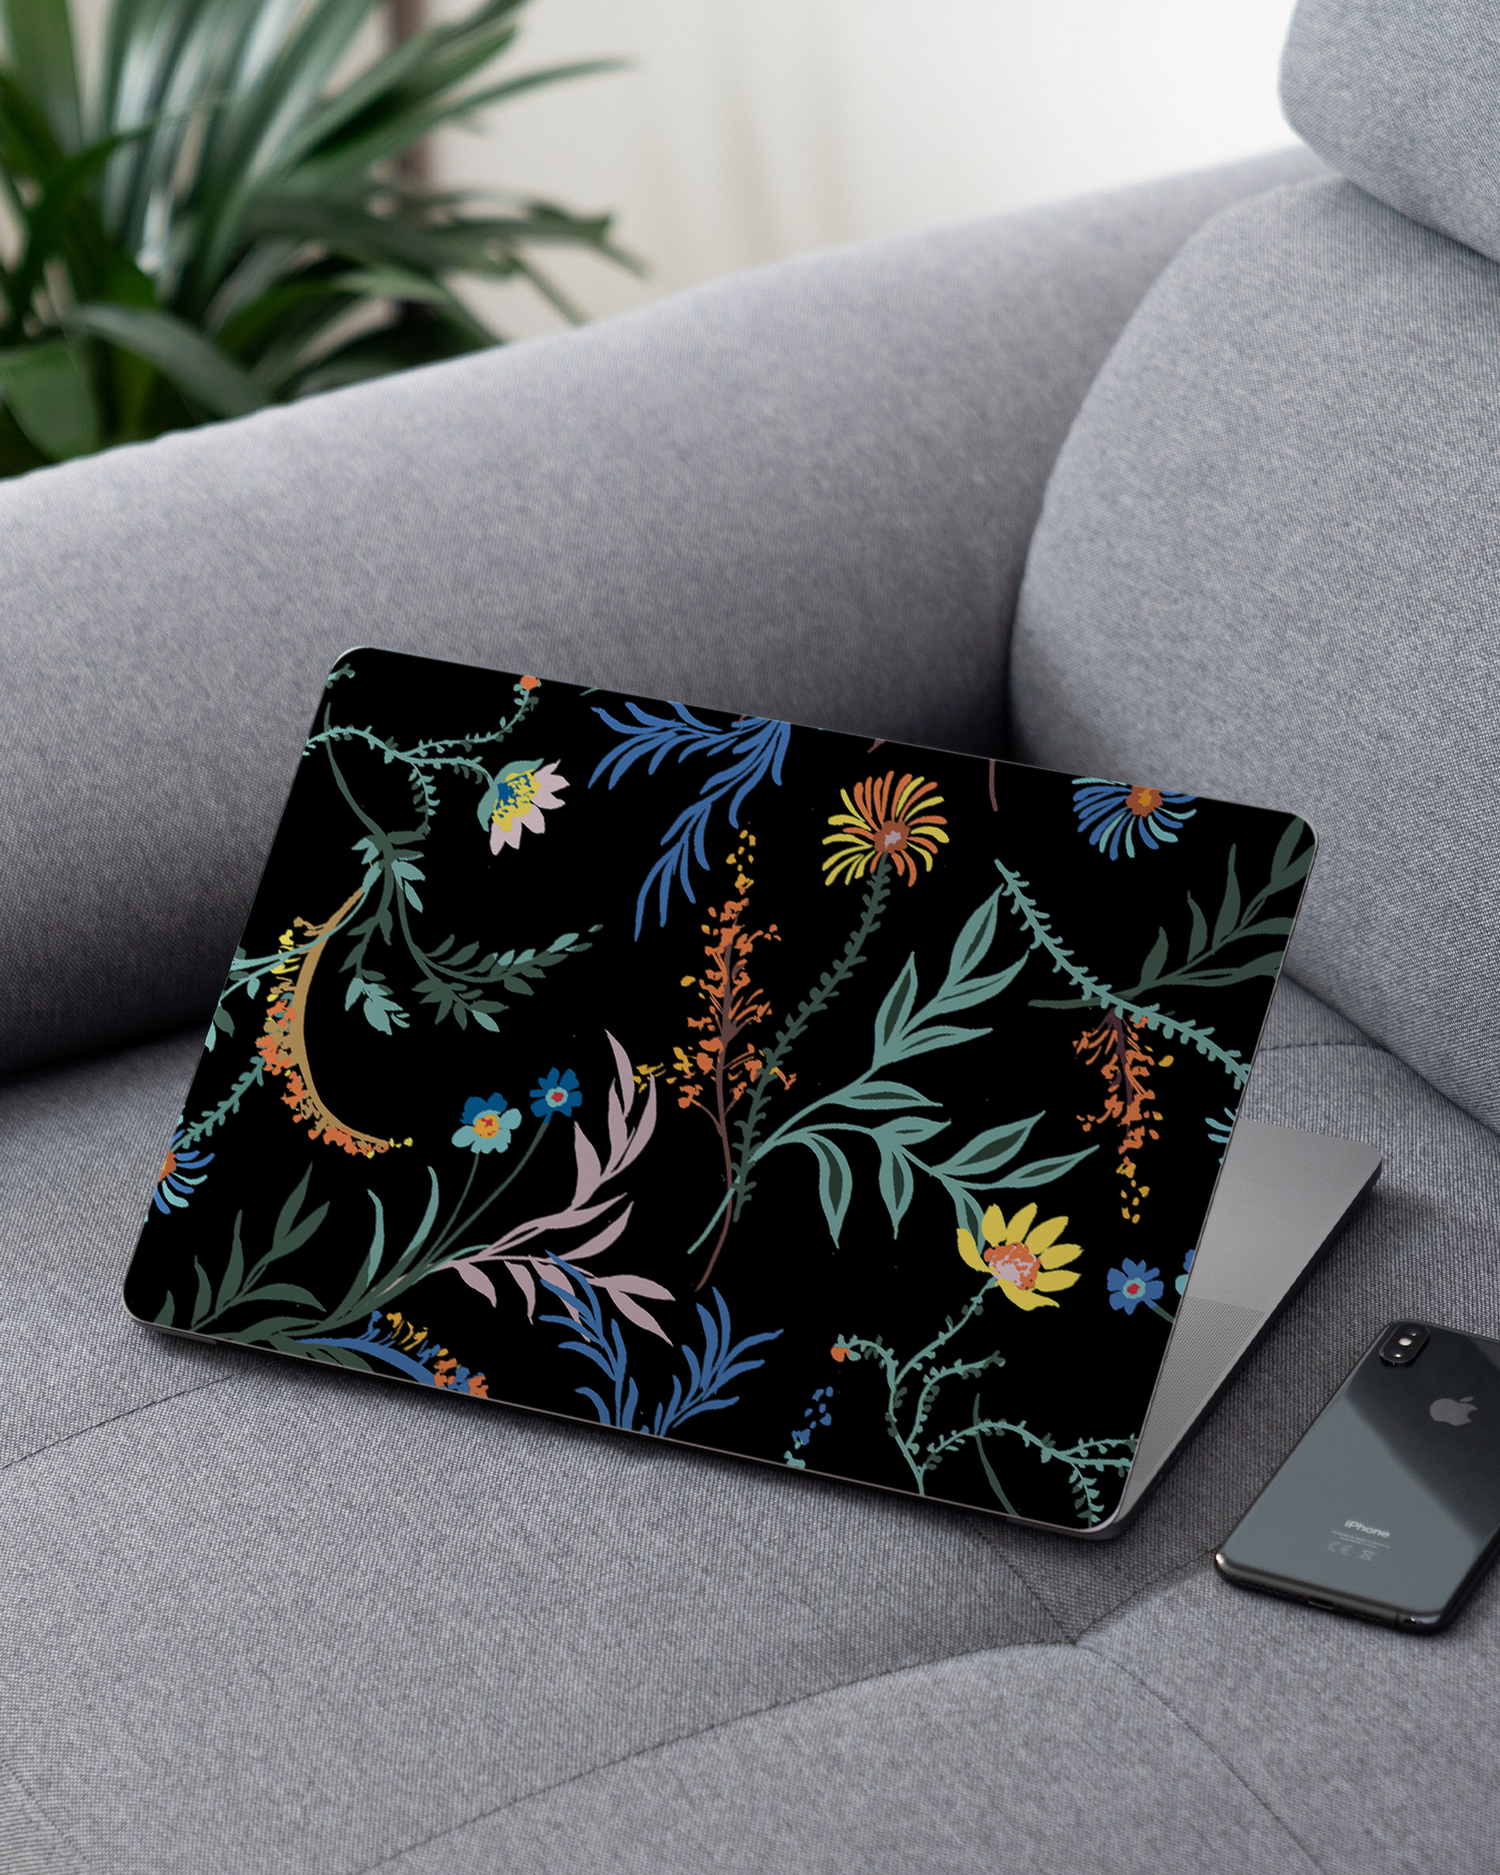 Woodland Spring Floral Laptop Skin for 13 inch Apple MacBooks on a couch